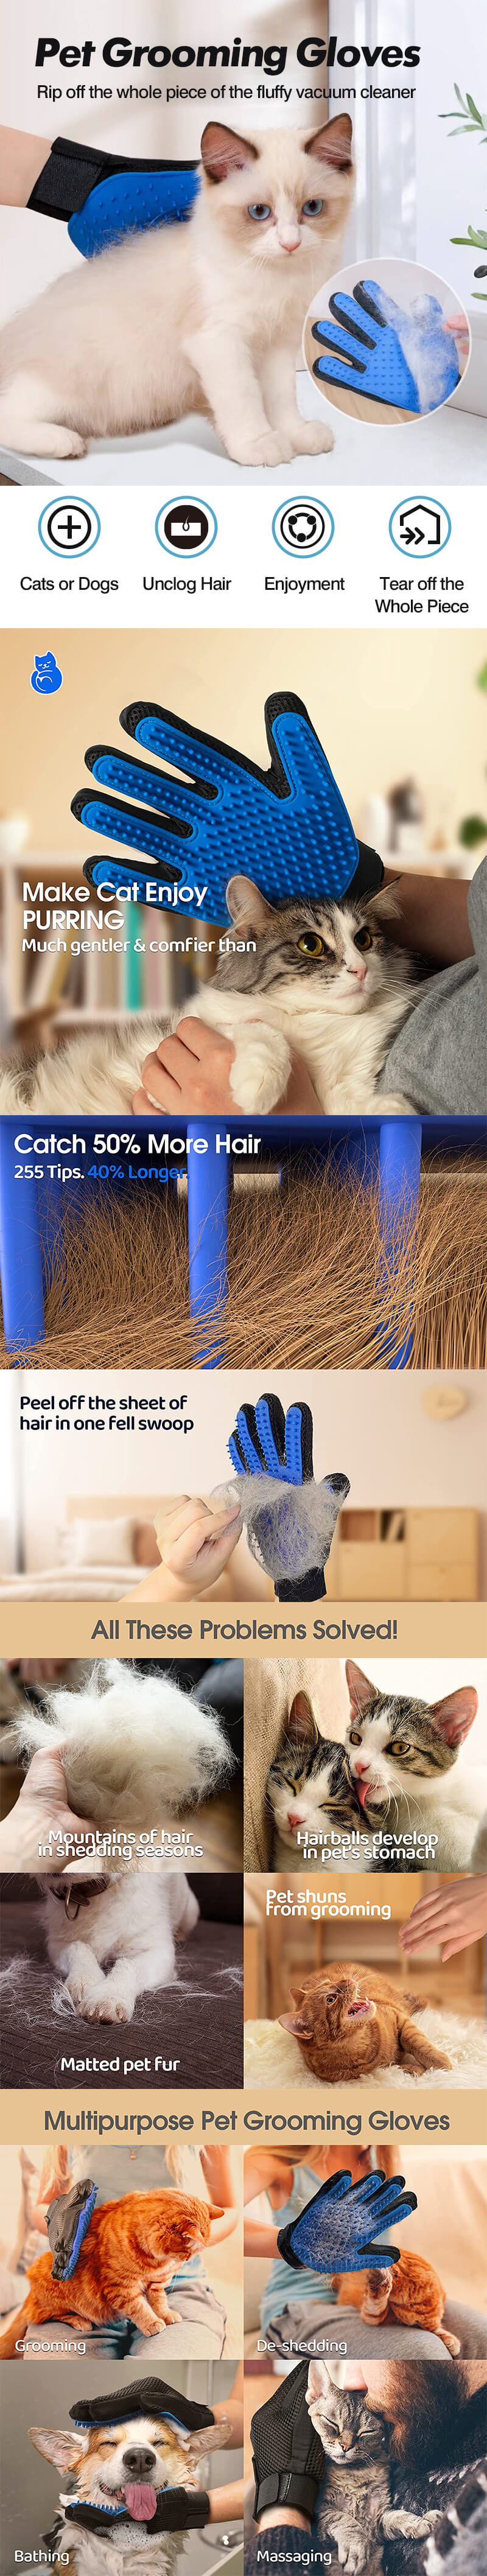 Colorful-Pet-Grooming-Gloves-Product-details